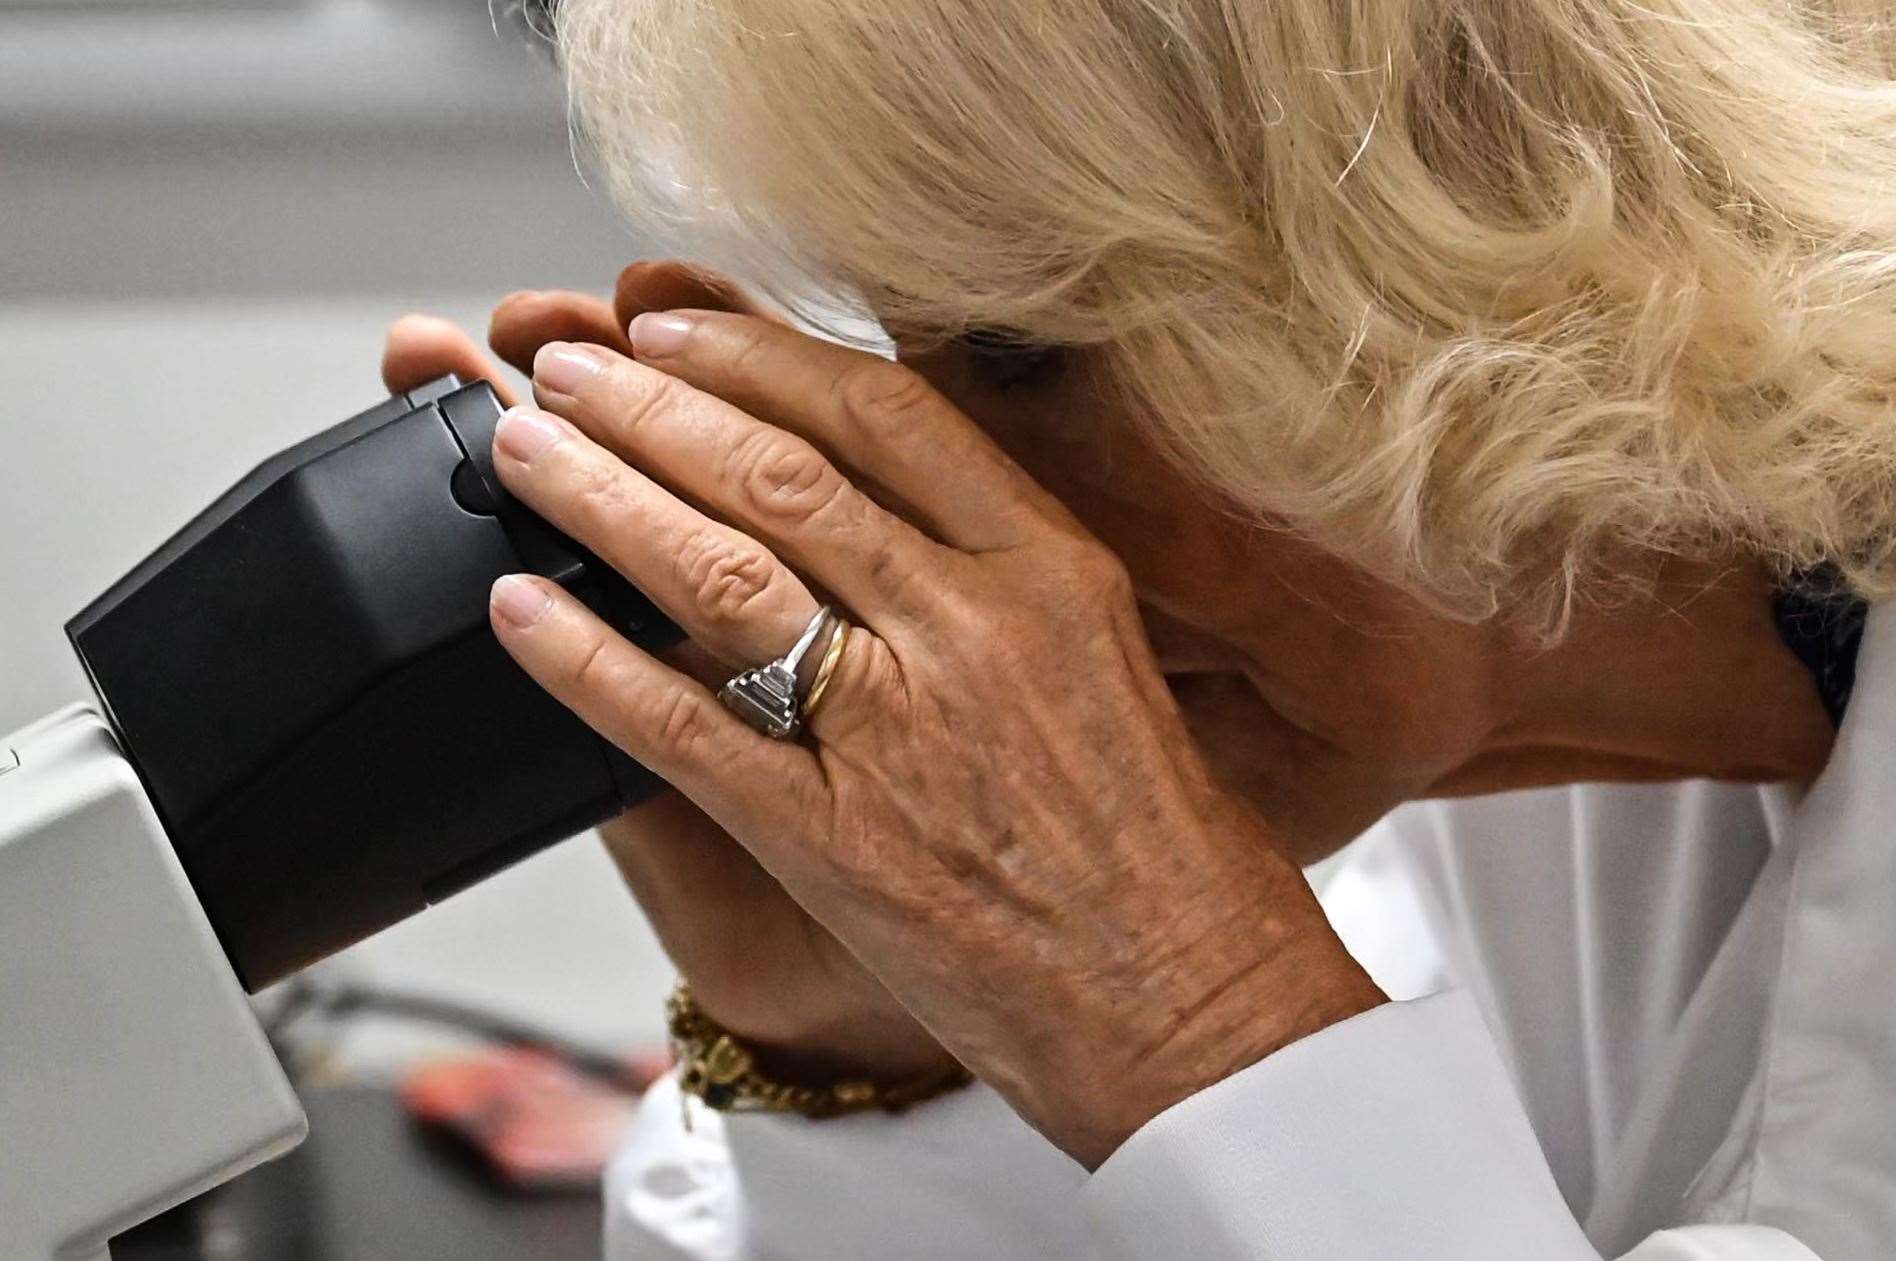 The Queen looked into a microscope during her visit to learn about research work into type 1 diabetes (Justin Tallis/PA)